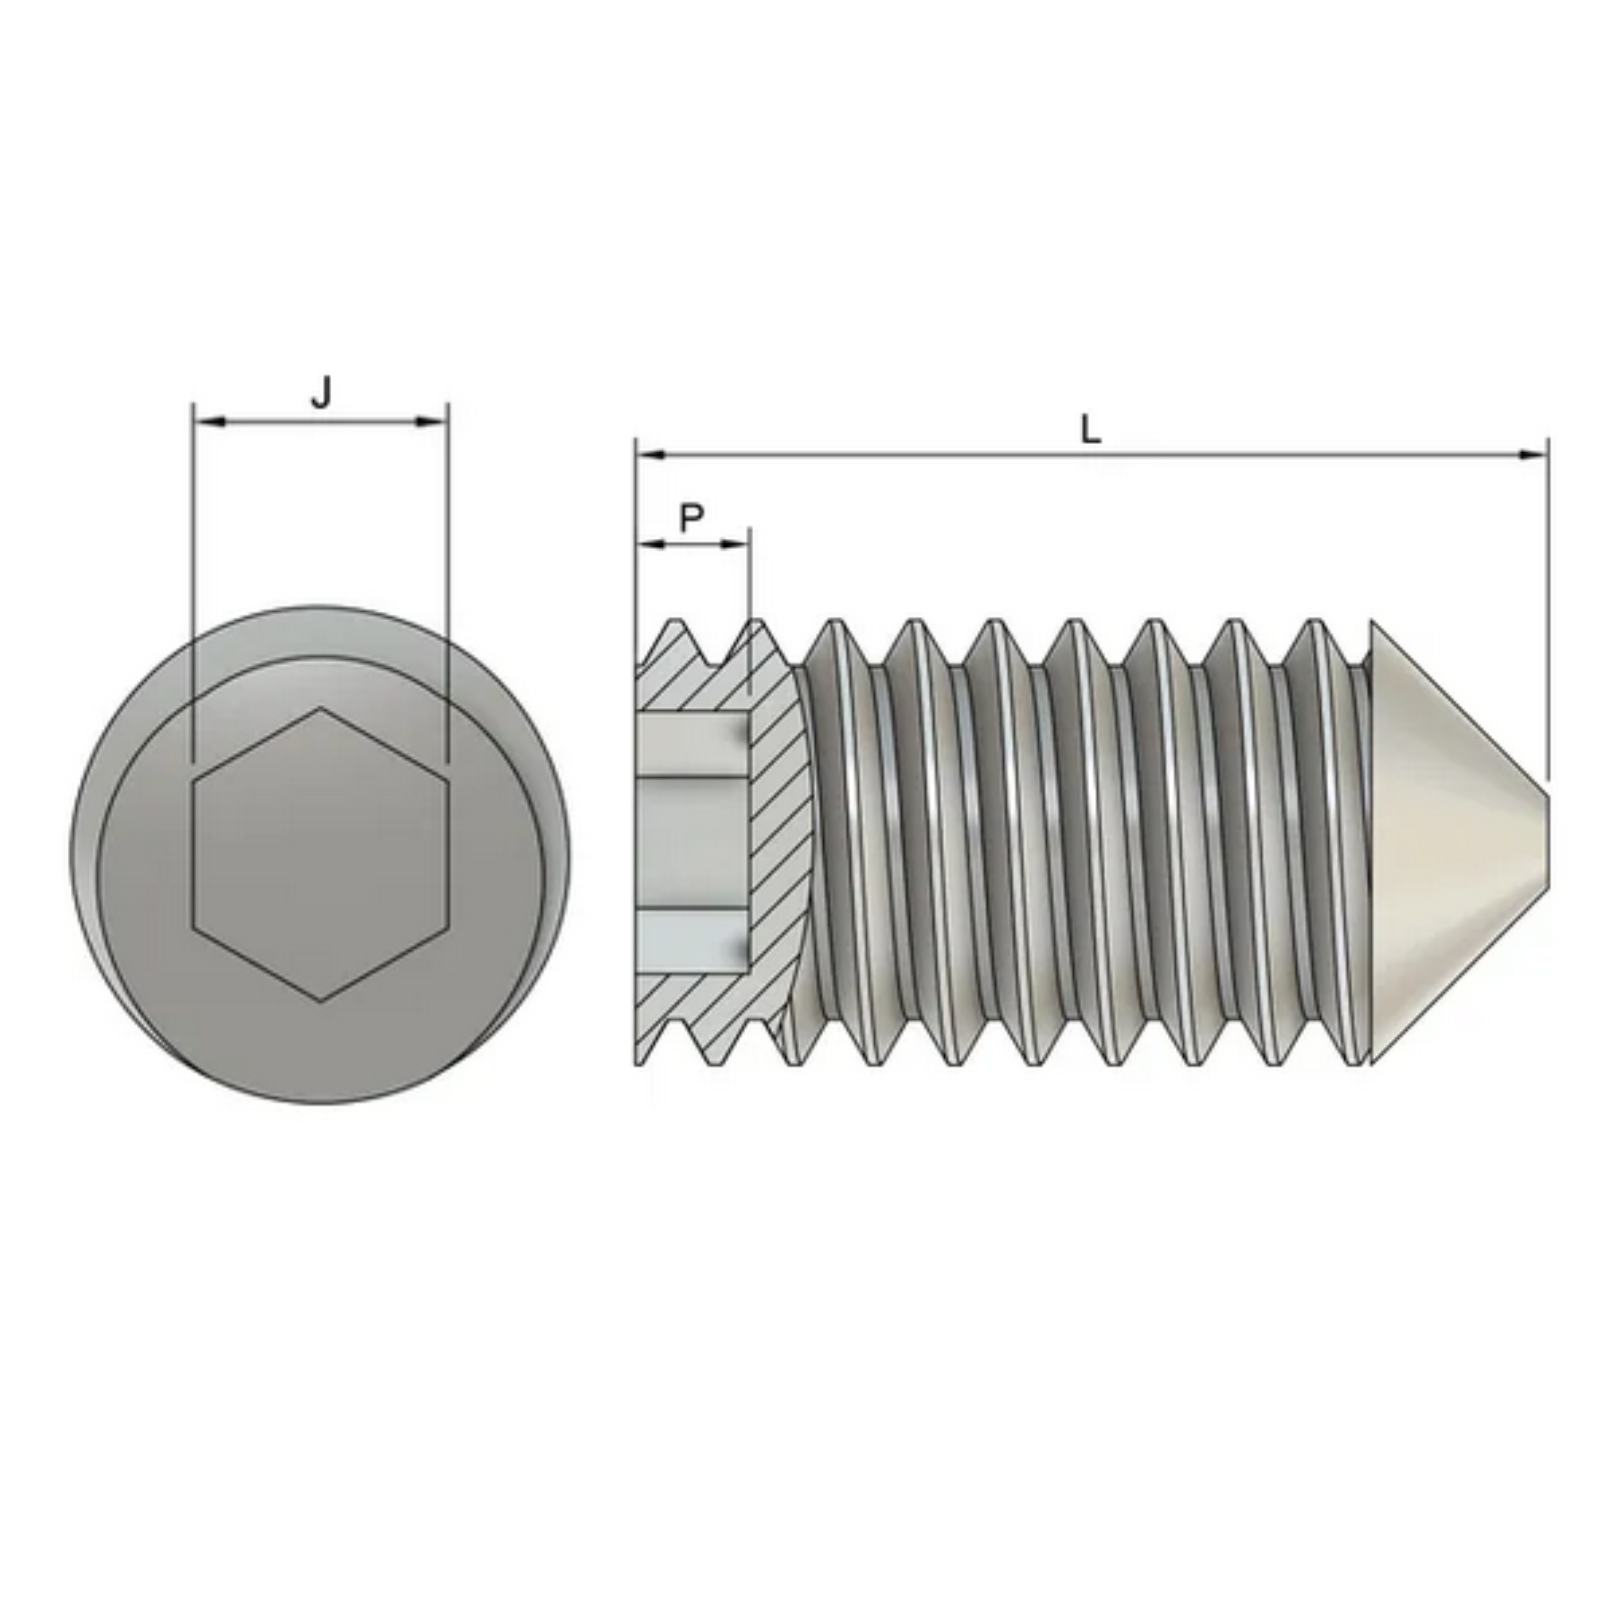 M5 Cone Point Set / Grub Screws (DIN 914) - Stainless Steel (A2)